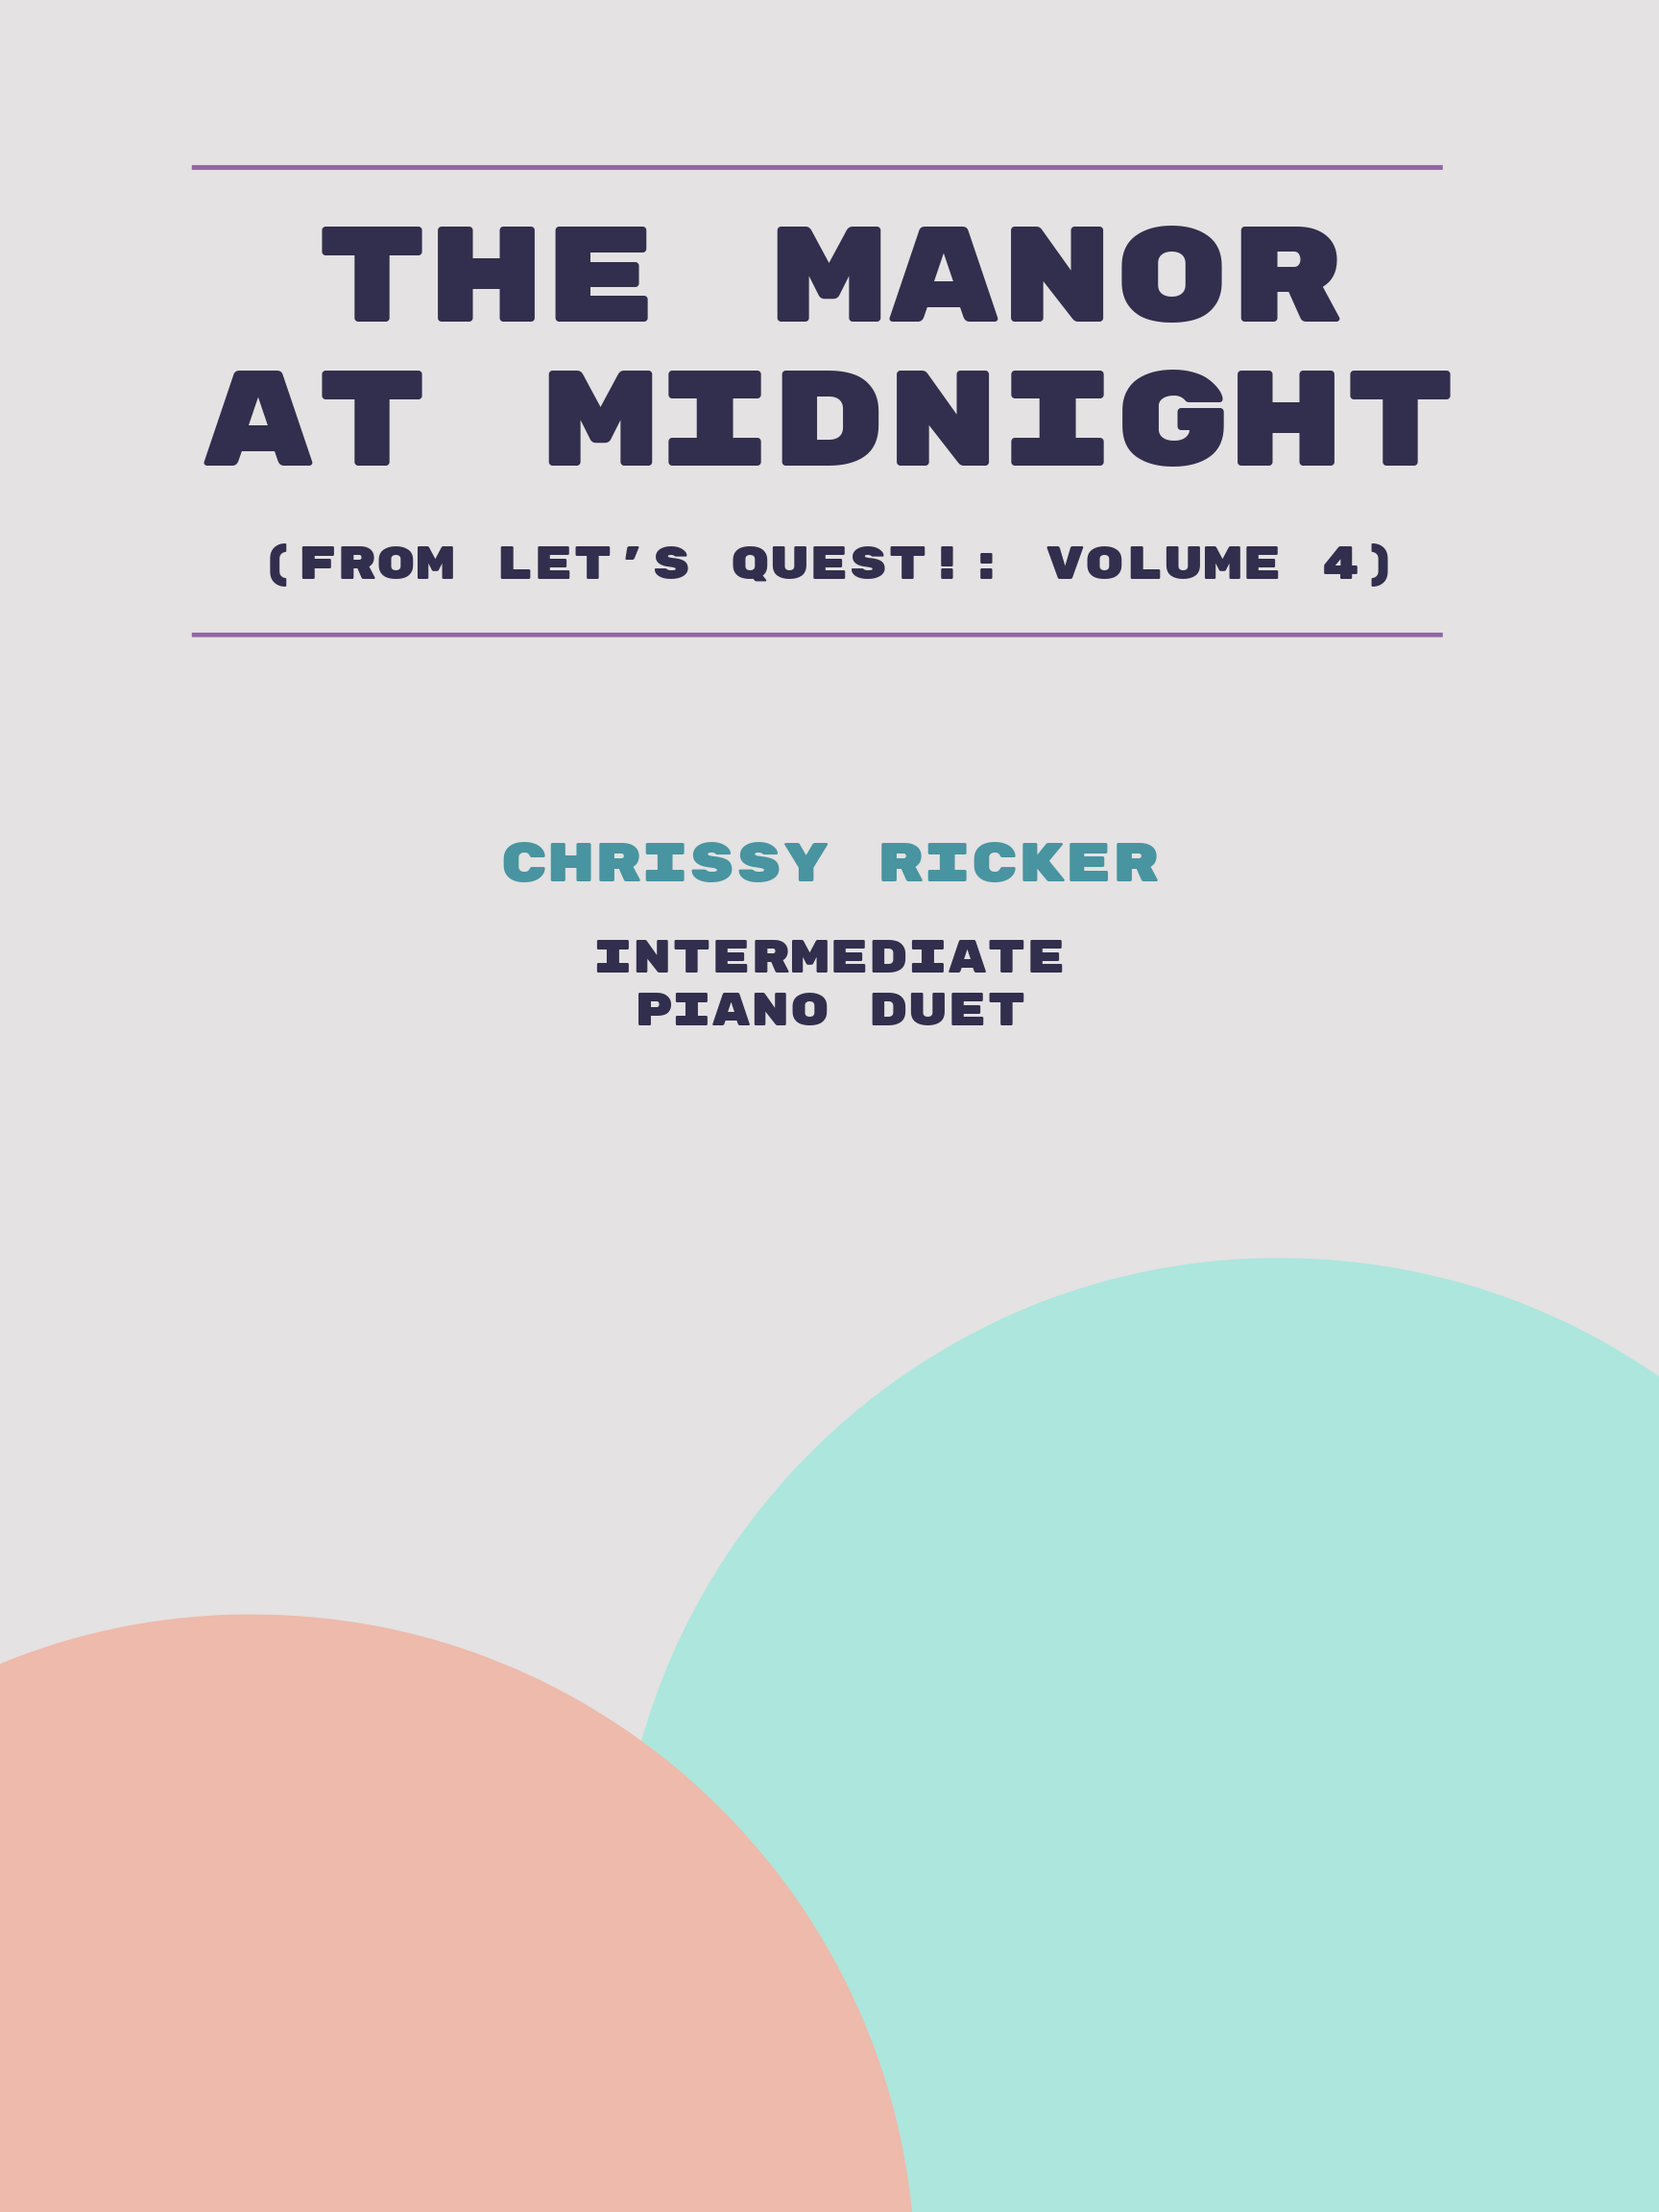 The Manor at Midnight by Chrissy Ricker